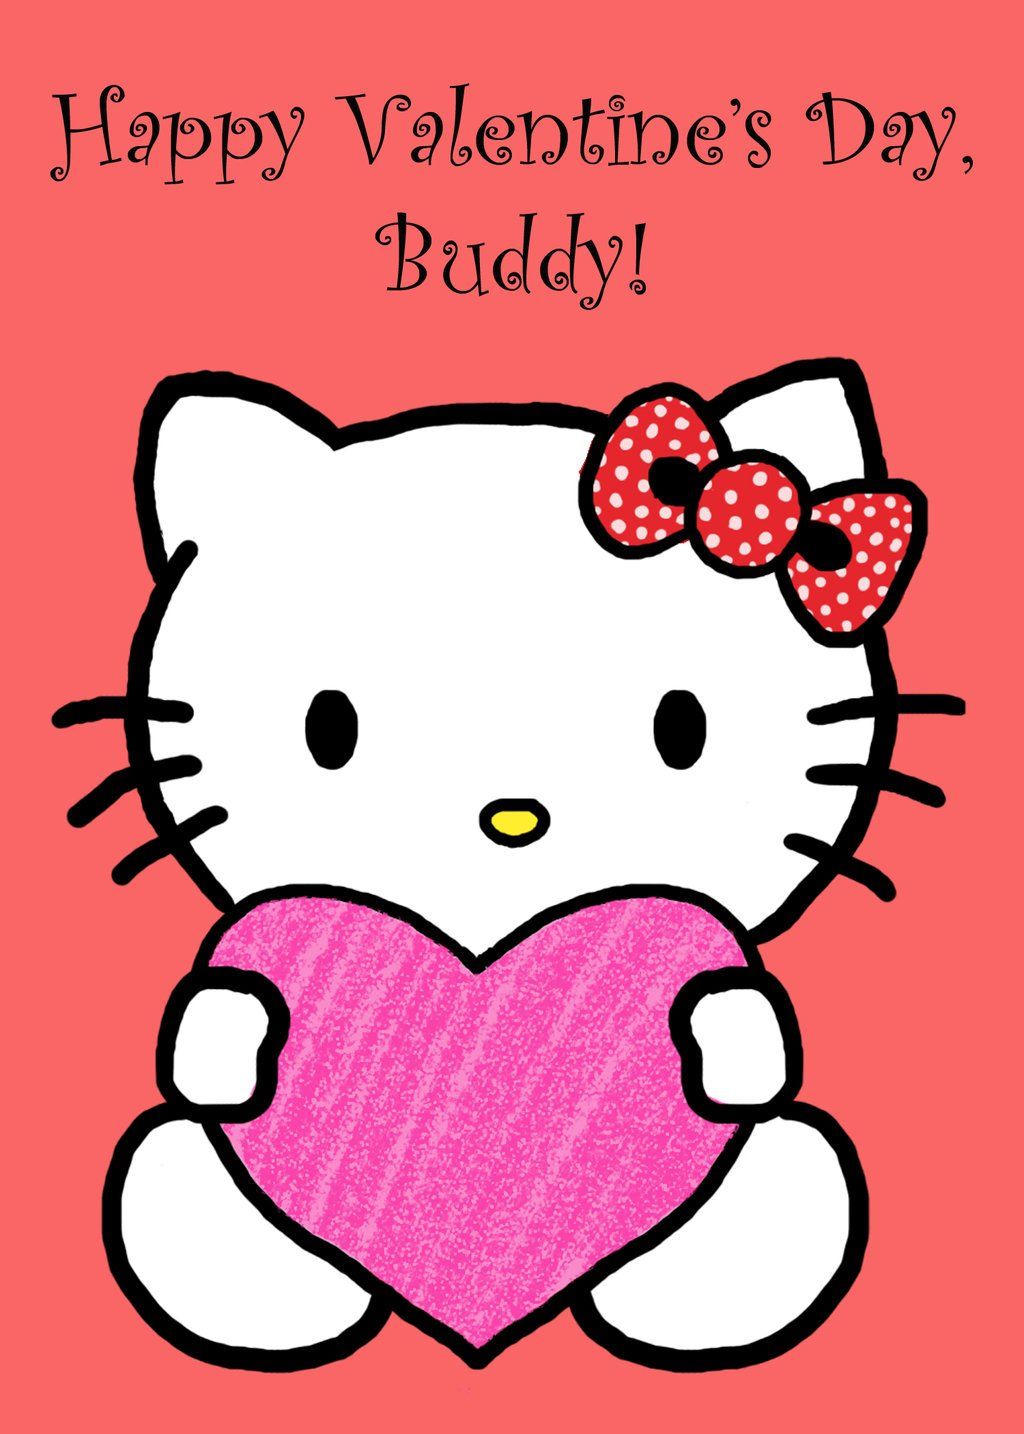 Free download Hello Kitty Valentine by HermioneFrost [1024x1434] for your Desktop, Mobile & Tablet. Explore Hello Kitty Valentine Wallpaper. Hello Kitty Wallpaper Desktop, Hello Kitty Valentine's Day Wallpaper, Valentine Kitty Wallpaper